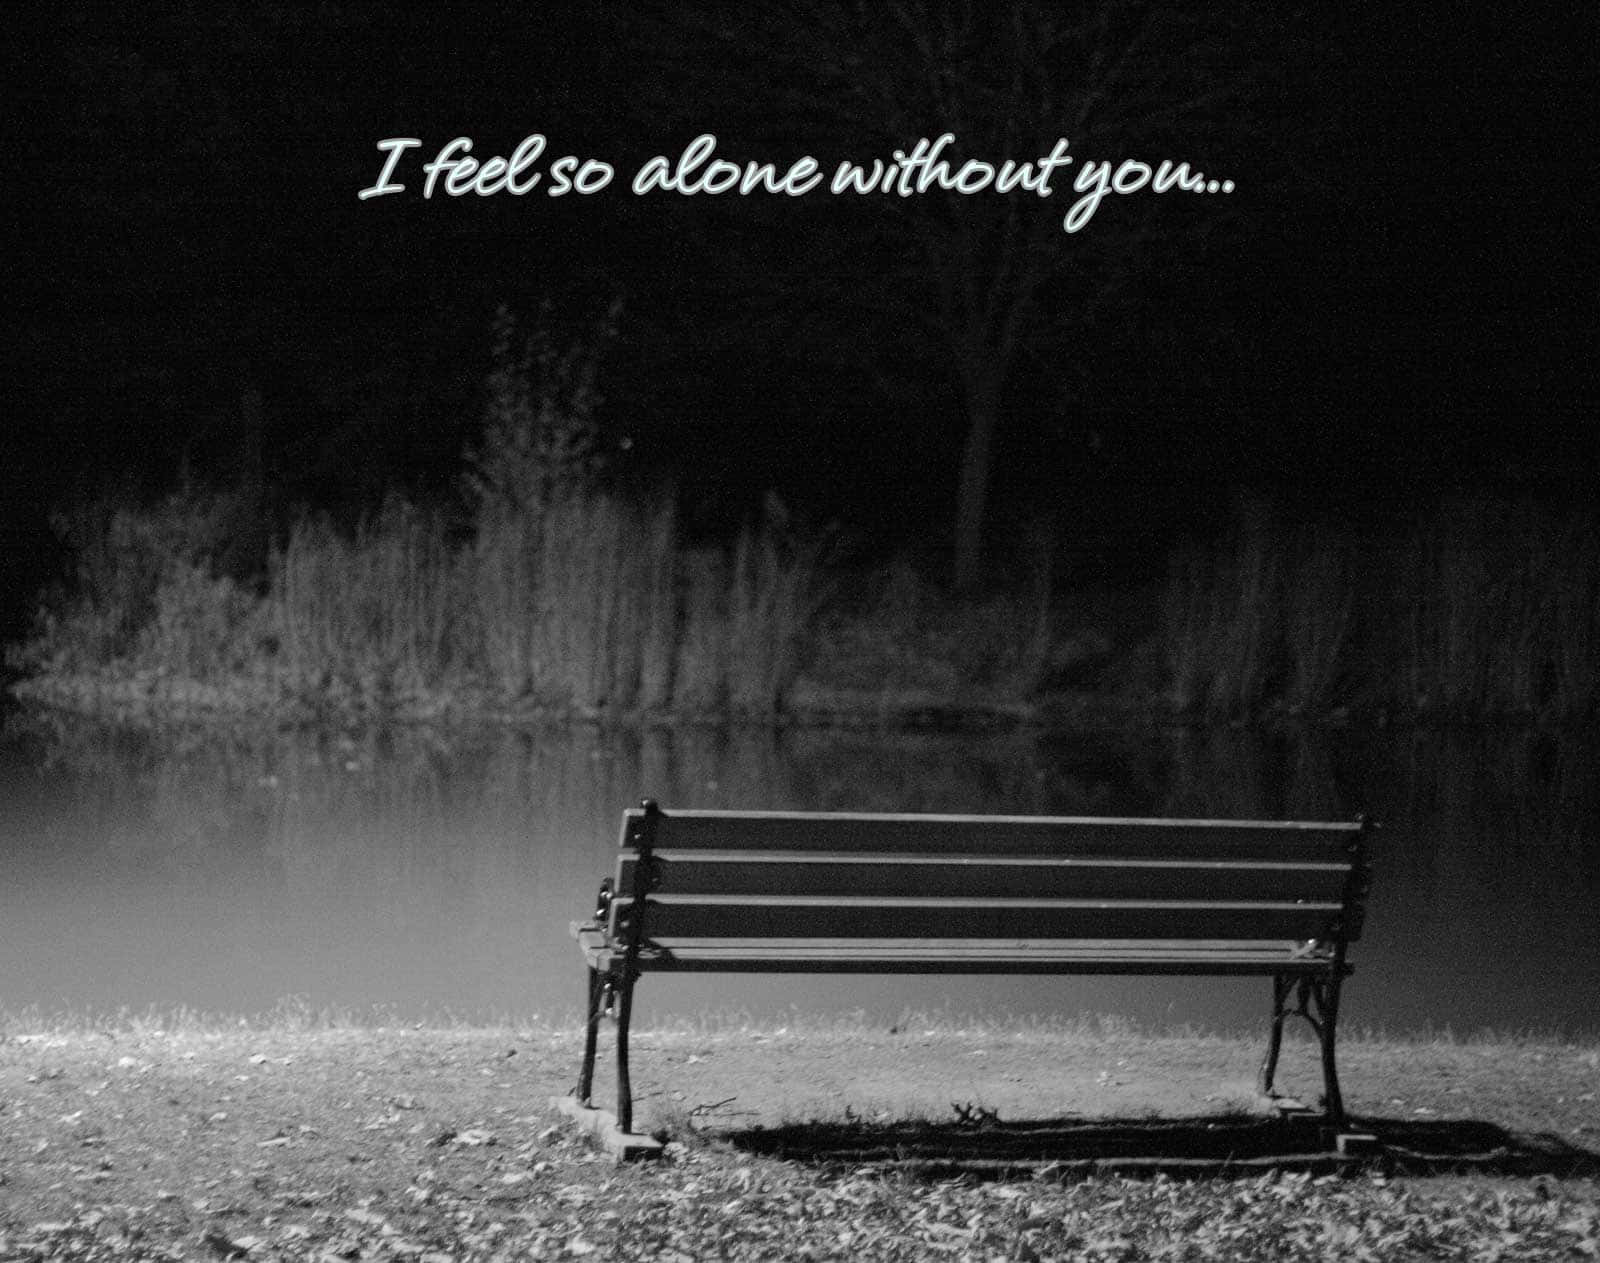 feeling lonely quotes with images